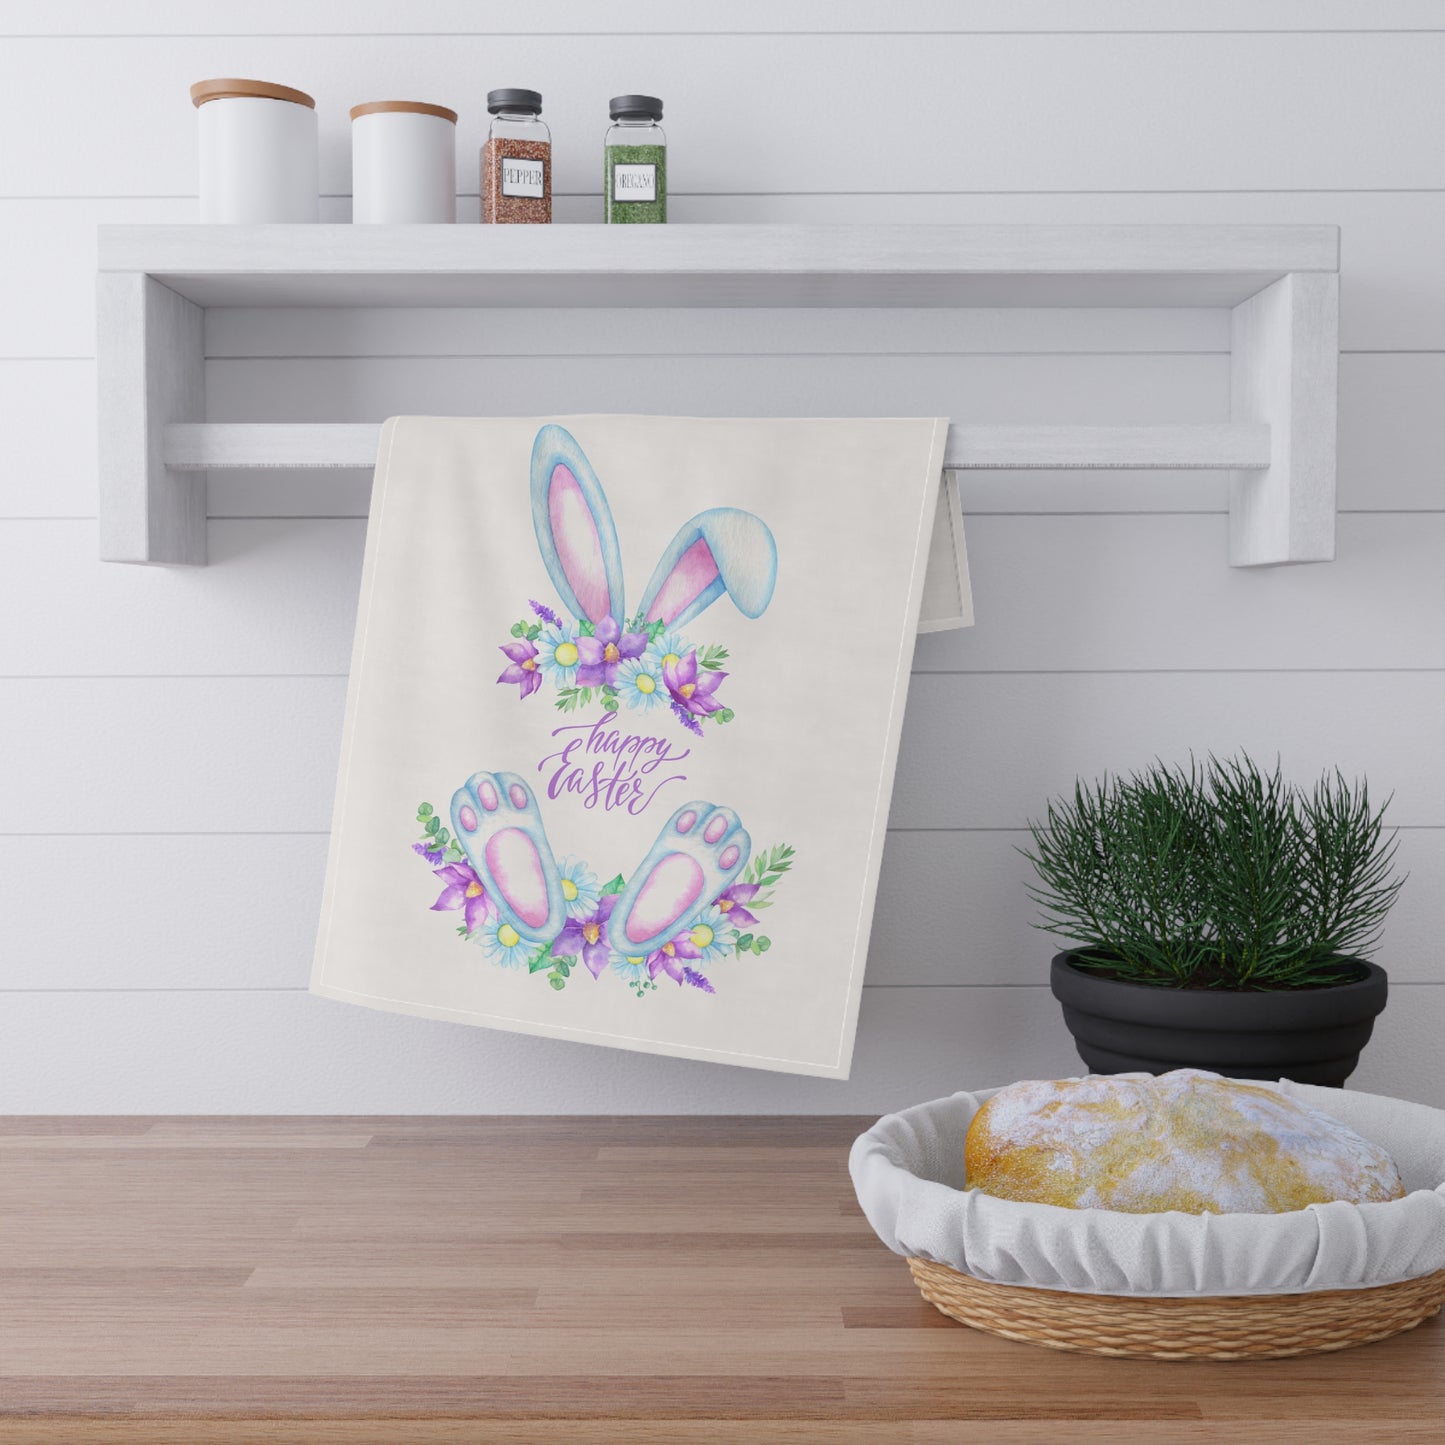 Absorbent Easter Greeting Towel: 18" x 30" for the kitchen, by Printify.